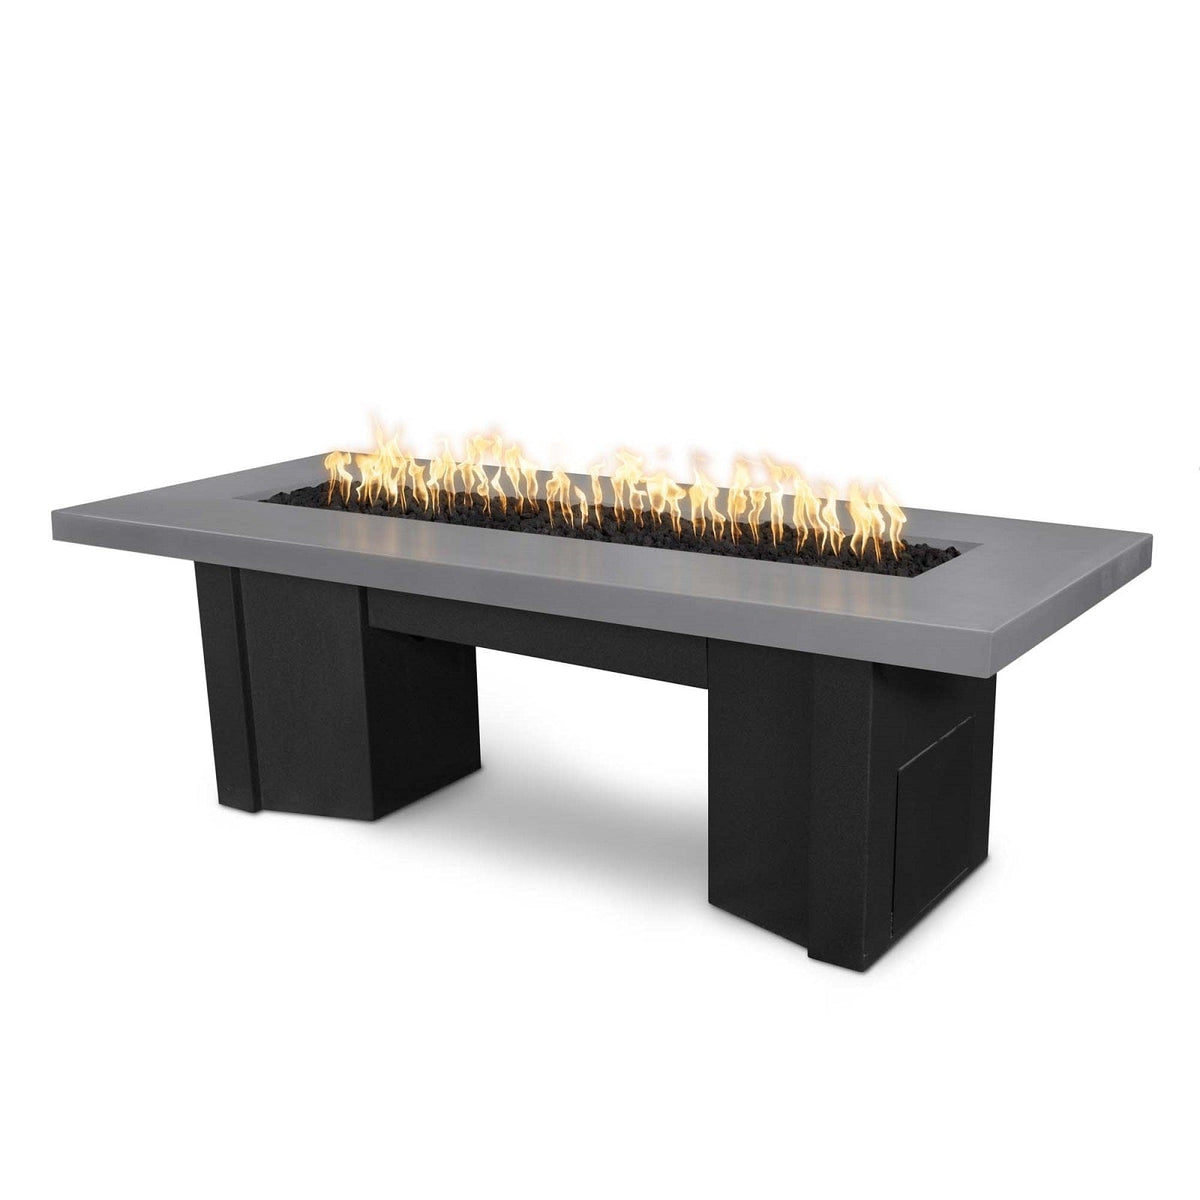 The Outdoor Plus Fire Features Natural Gray (-NGY) / Black Powder Coated Steel (-BLK) The Outdoor Plus 78&quot; Alameda Fire Table Smooth Concrete in Natural Gas - Flame Sense System with Push Button Spark Igniter / OPT-ALMGFRC78FSEN-NG